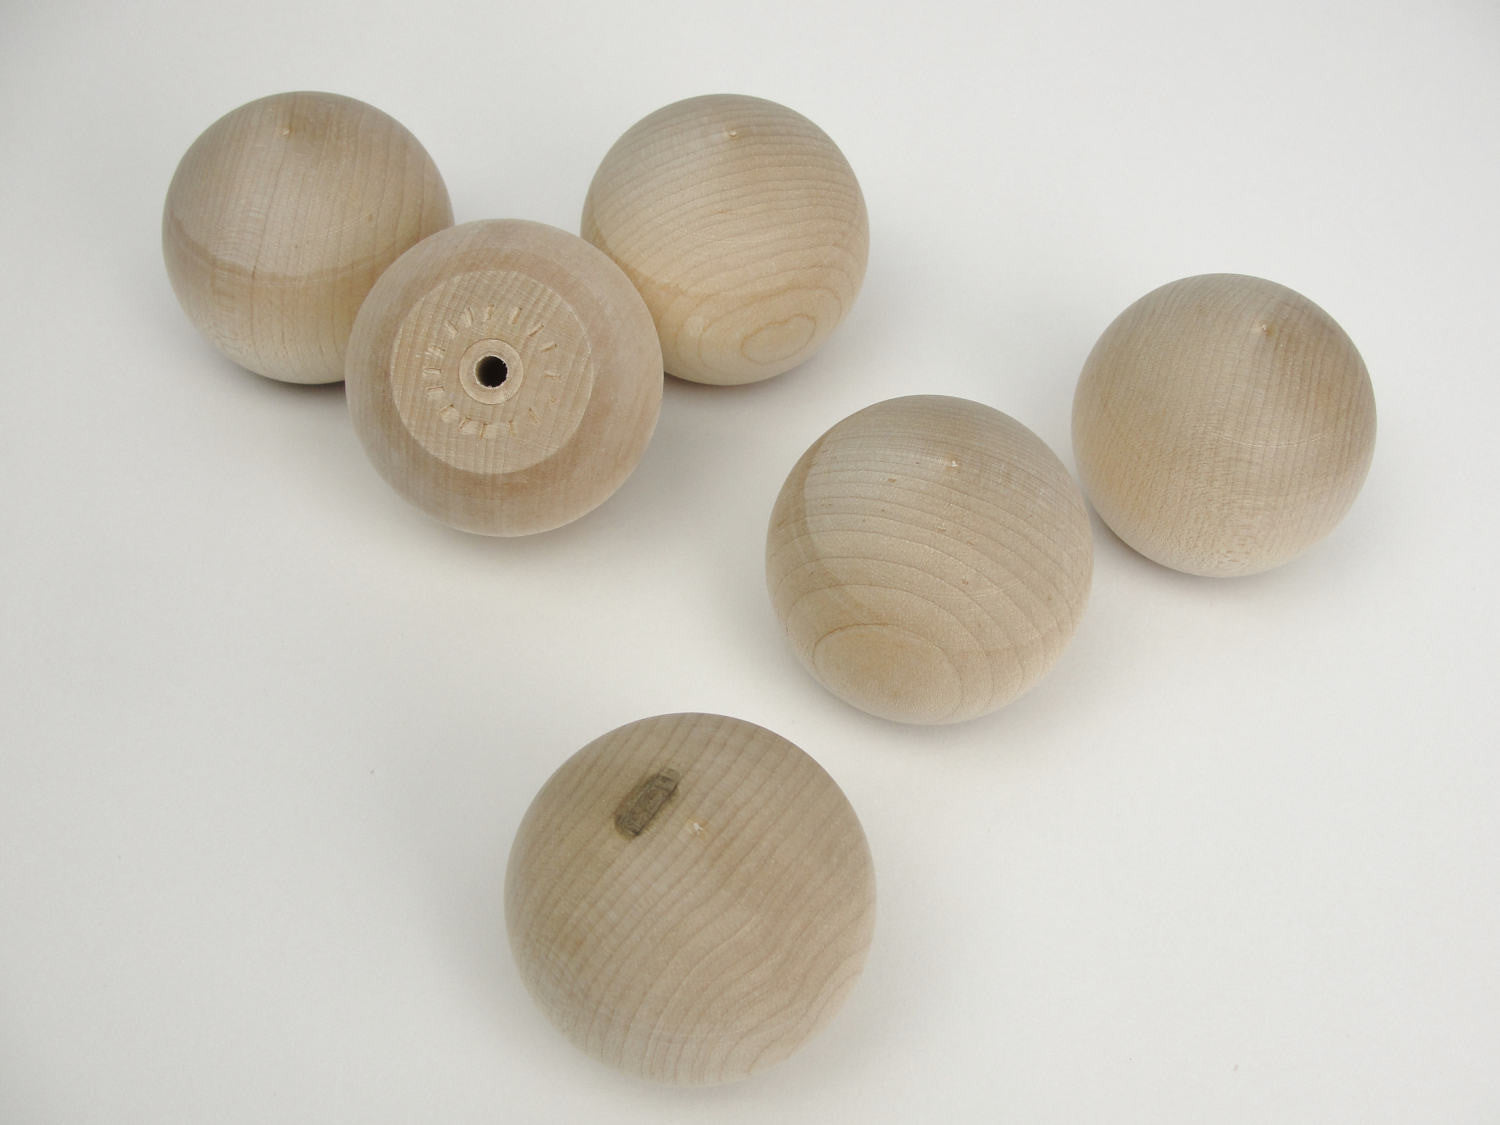 Wooden ball knob 2" (2 inch ball knob) solid wood set of 6 - Wood parts - Craft Supply House